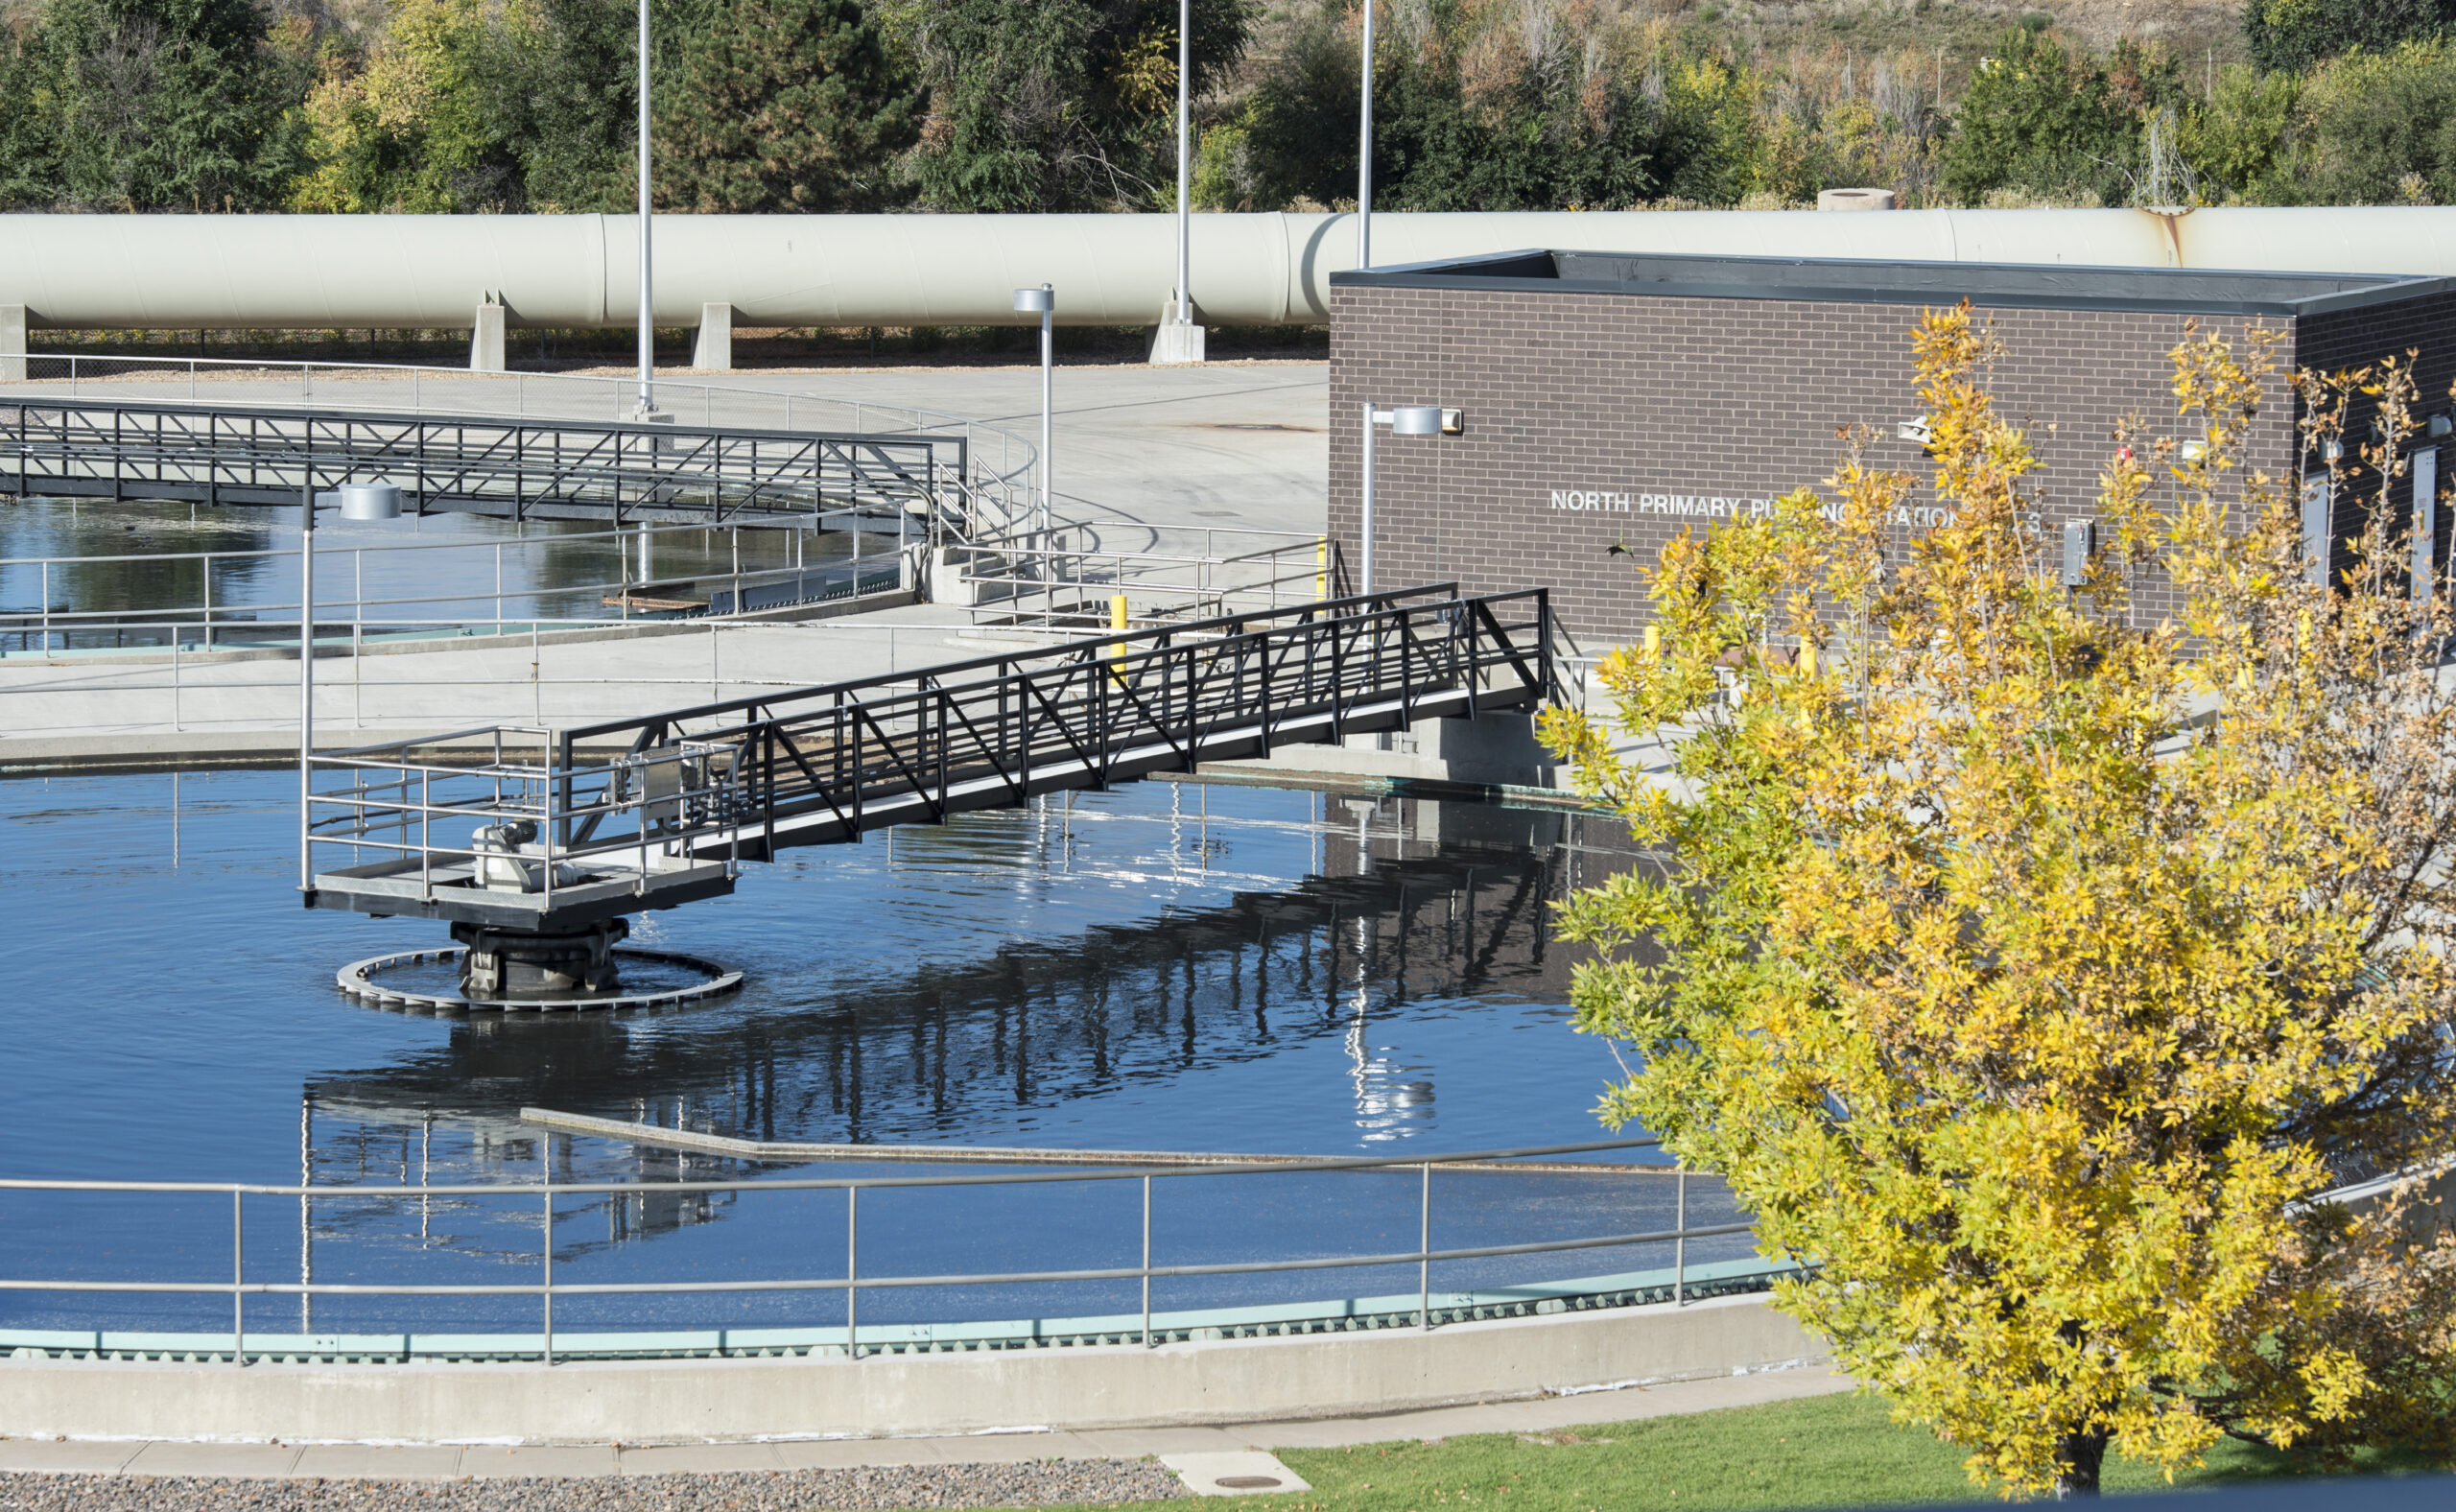 A primary clarifier framed by a yellow tree in autumn at Metro's Robert W. Hite Treatment Facility